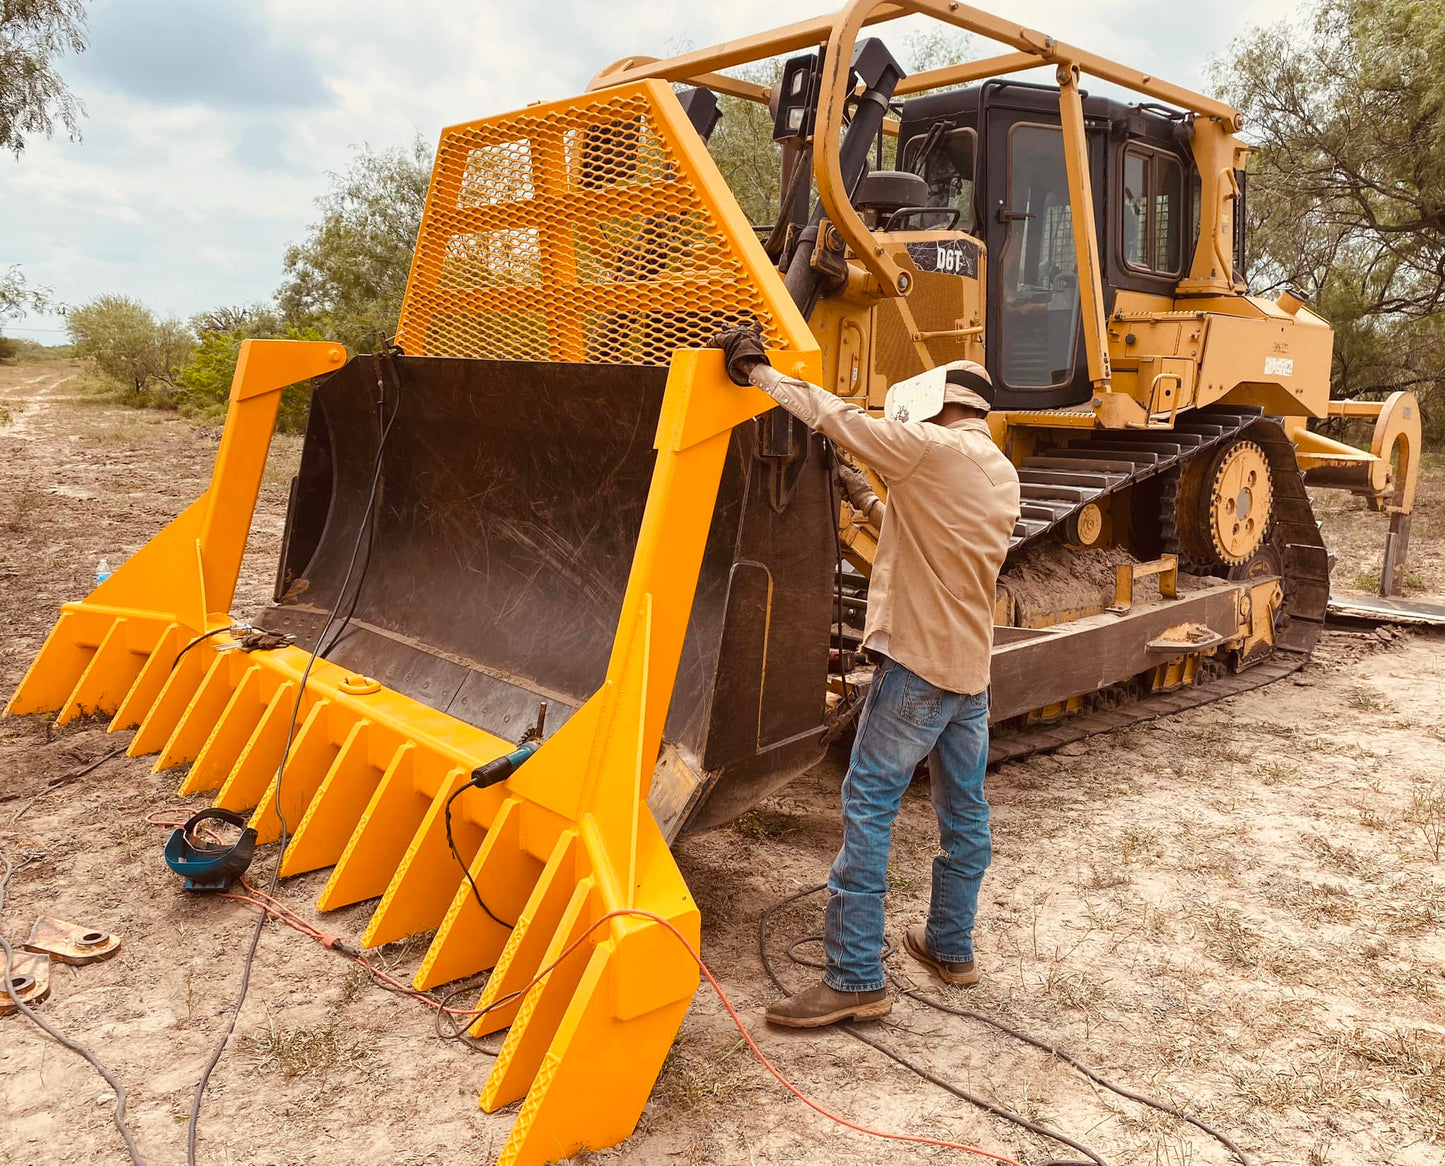 HEBBRONVILLE MACHINE SHOP 8’ TO 24’ PIN ON HEAVY DUTY STACKING RAKE FOR SKID STEER